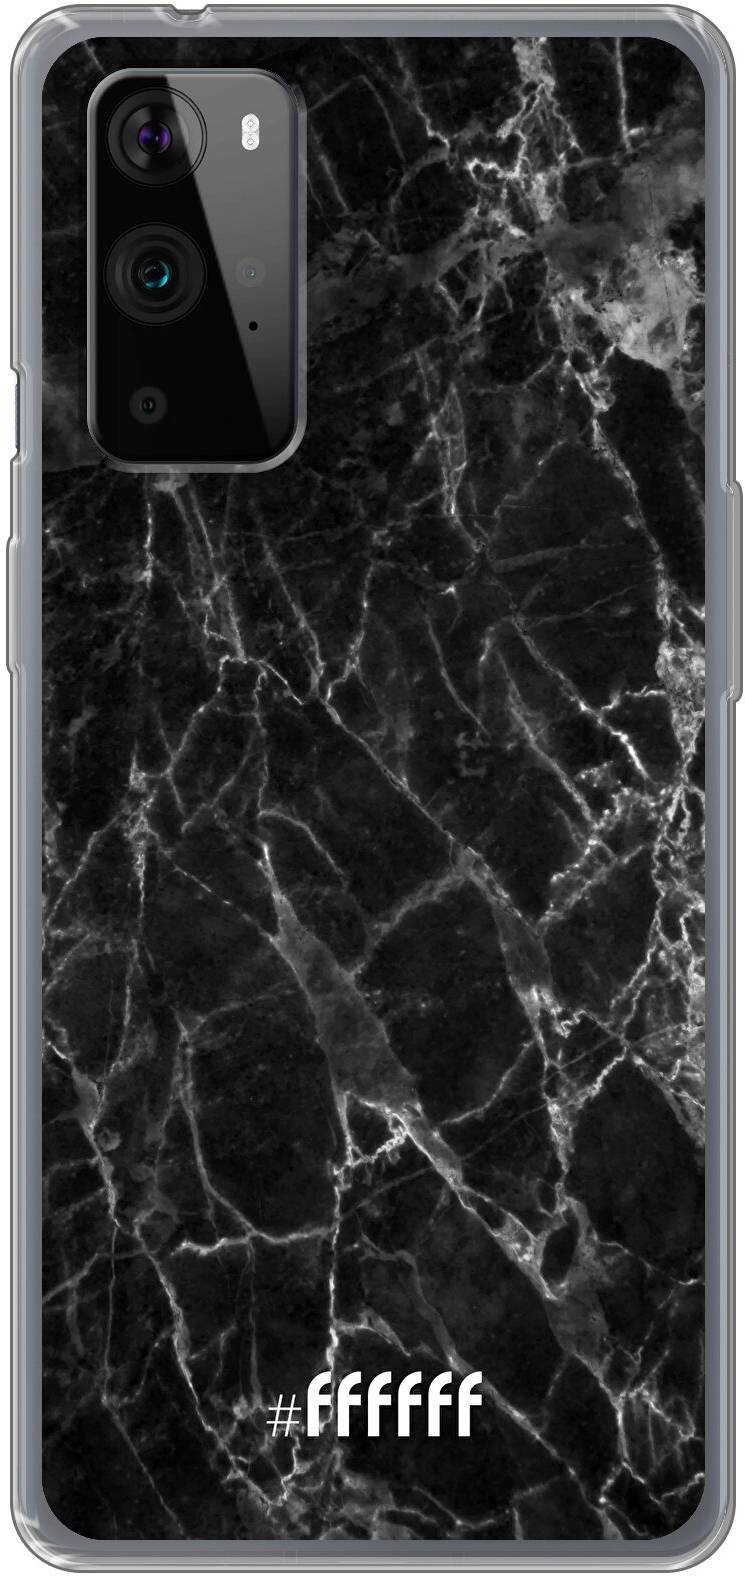 Shattered Marble 9 Pro